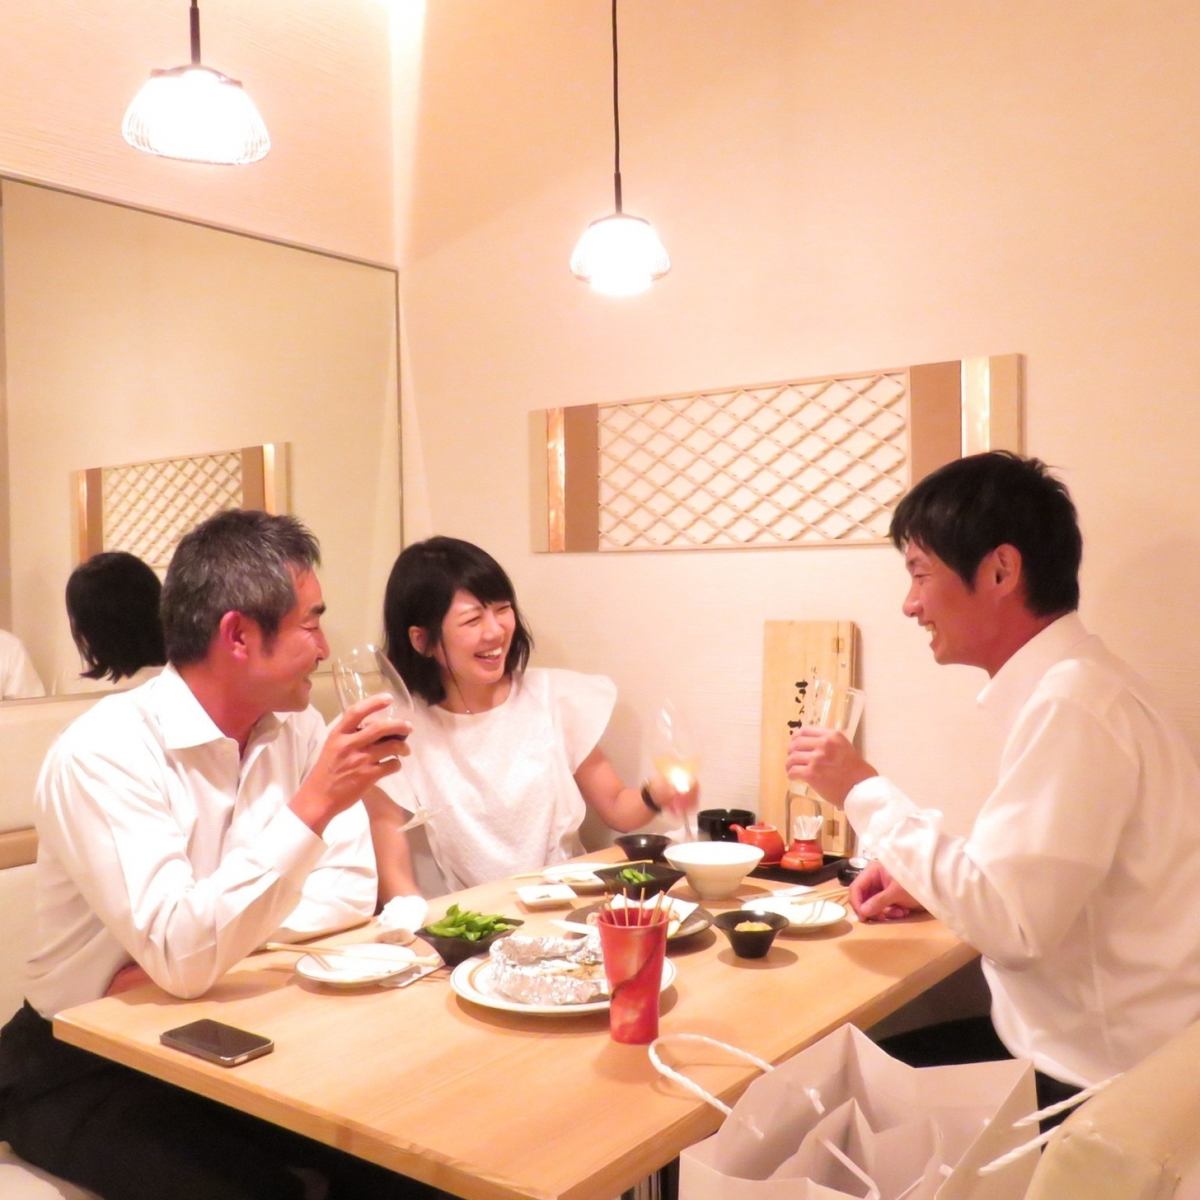 The high-quality Japanese space is perfect for a date.Spend a blissful moment with your loved ones....